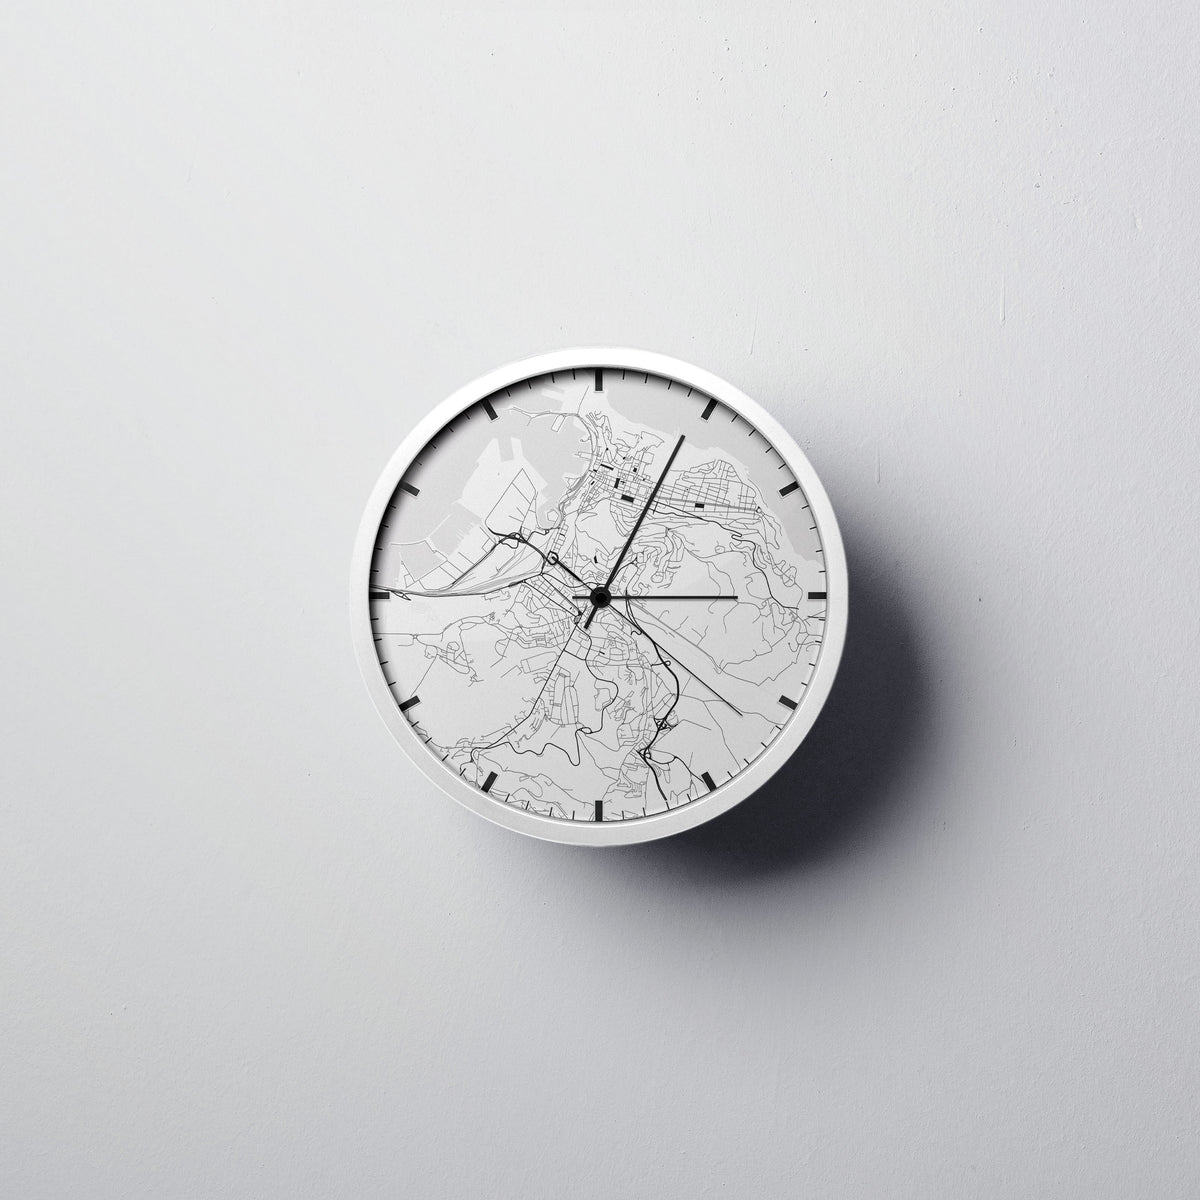 Ancona Wall Clock - Point Two Design